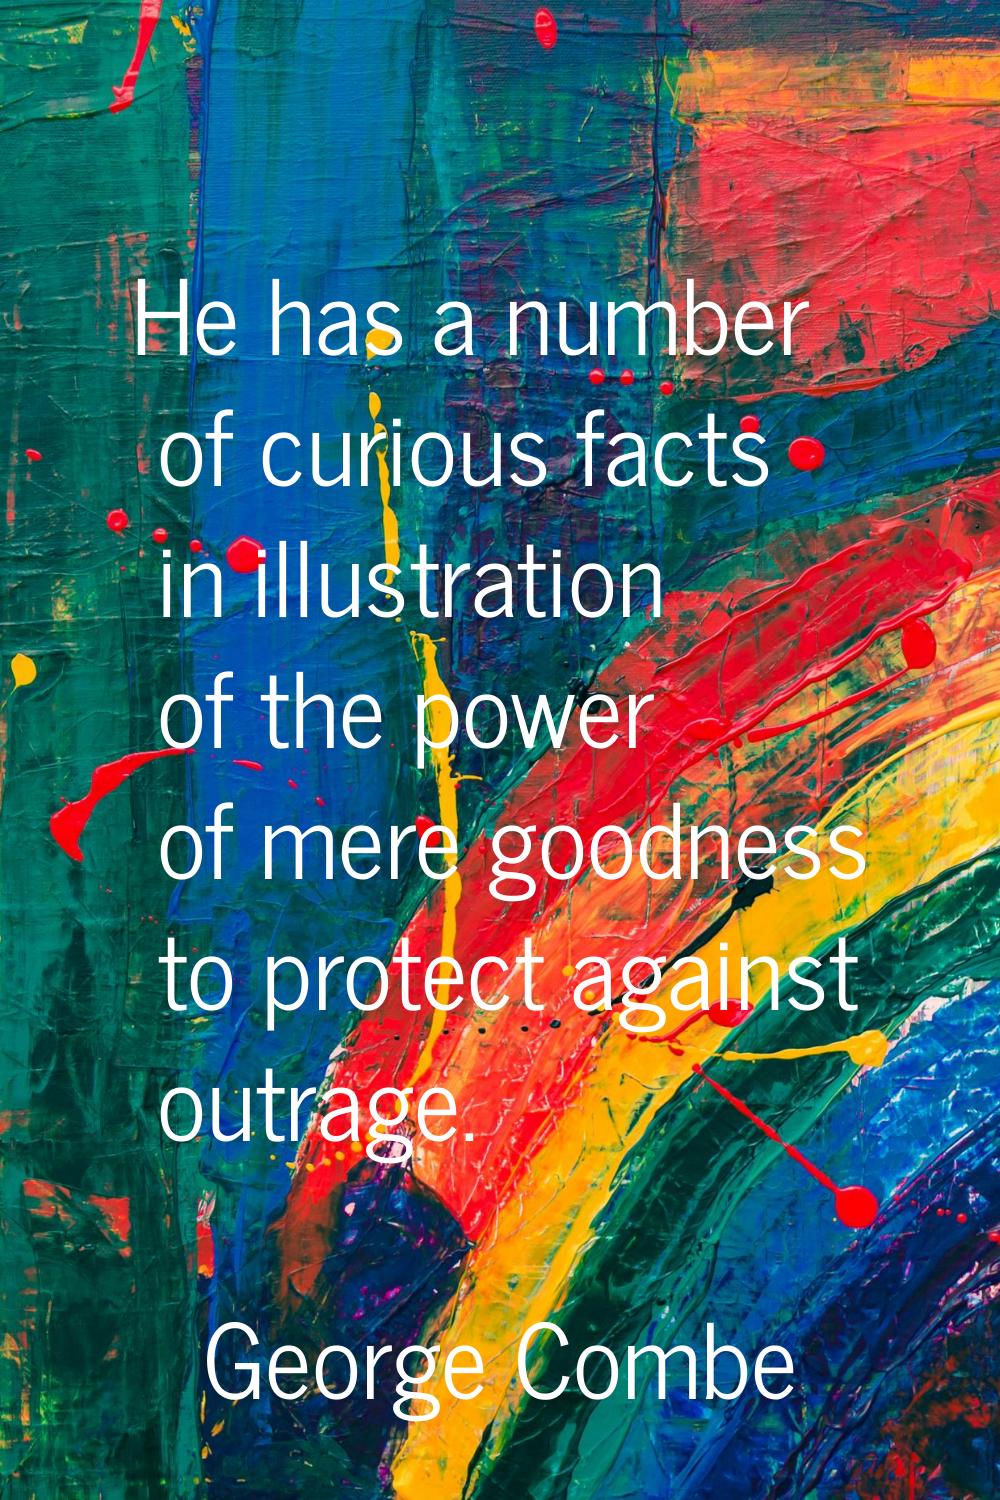 He has a number of curious facts in illustration of the power of mere goodness to protect against o